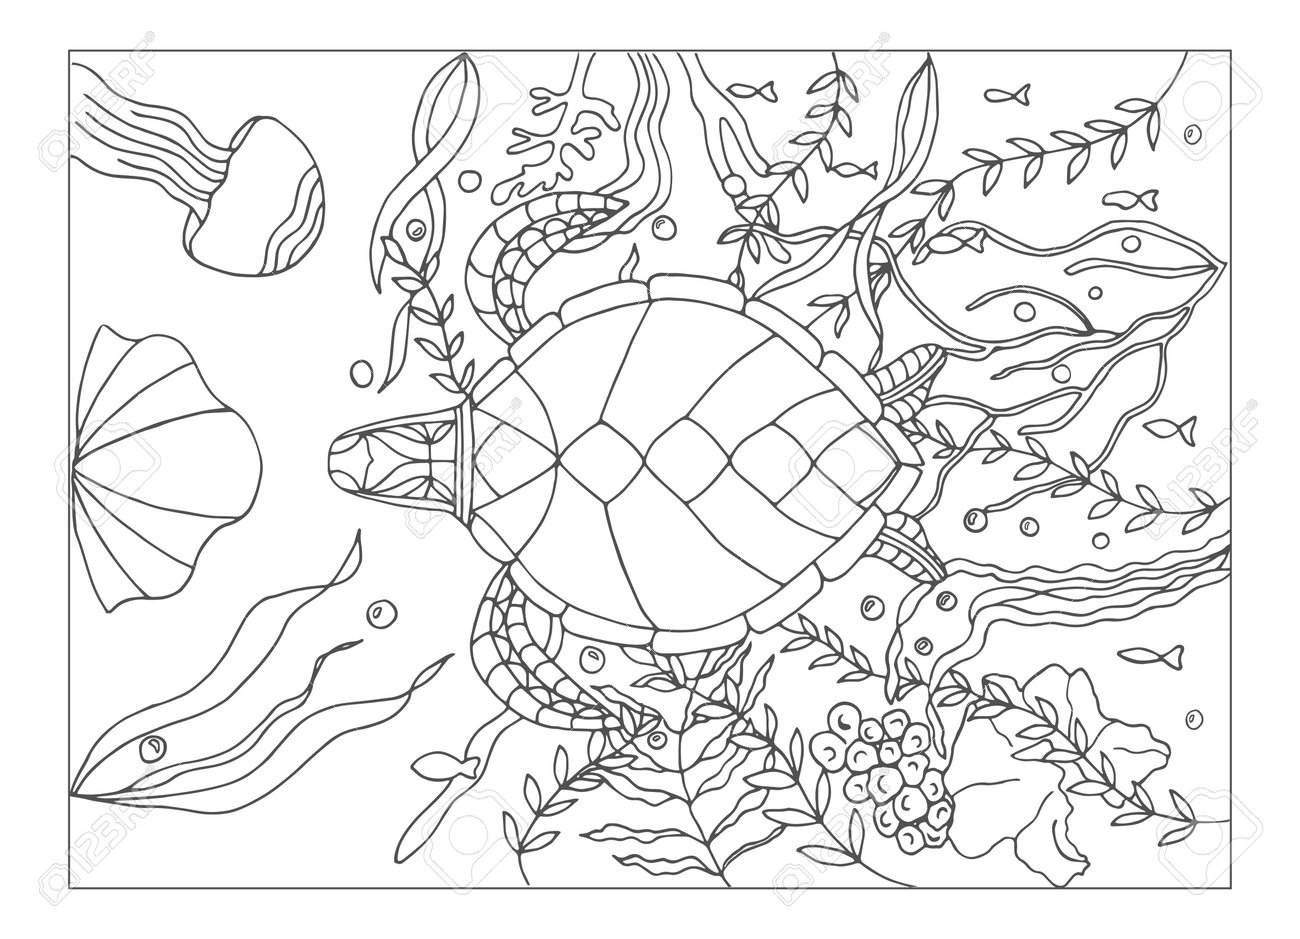 A floating turtle coloring page turtles hand